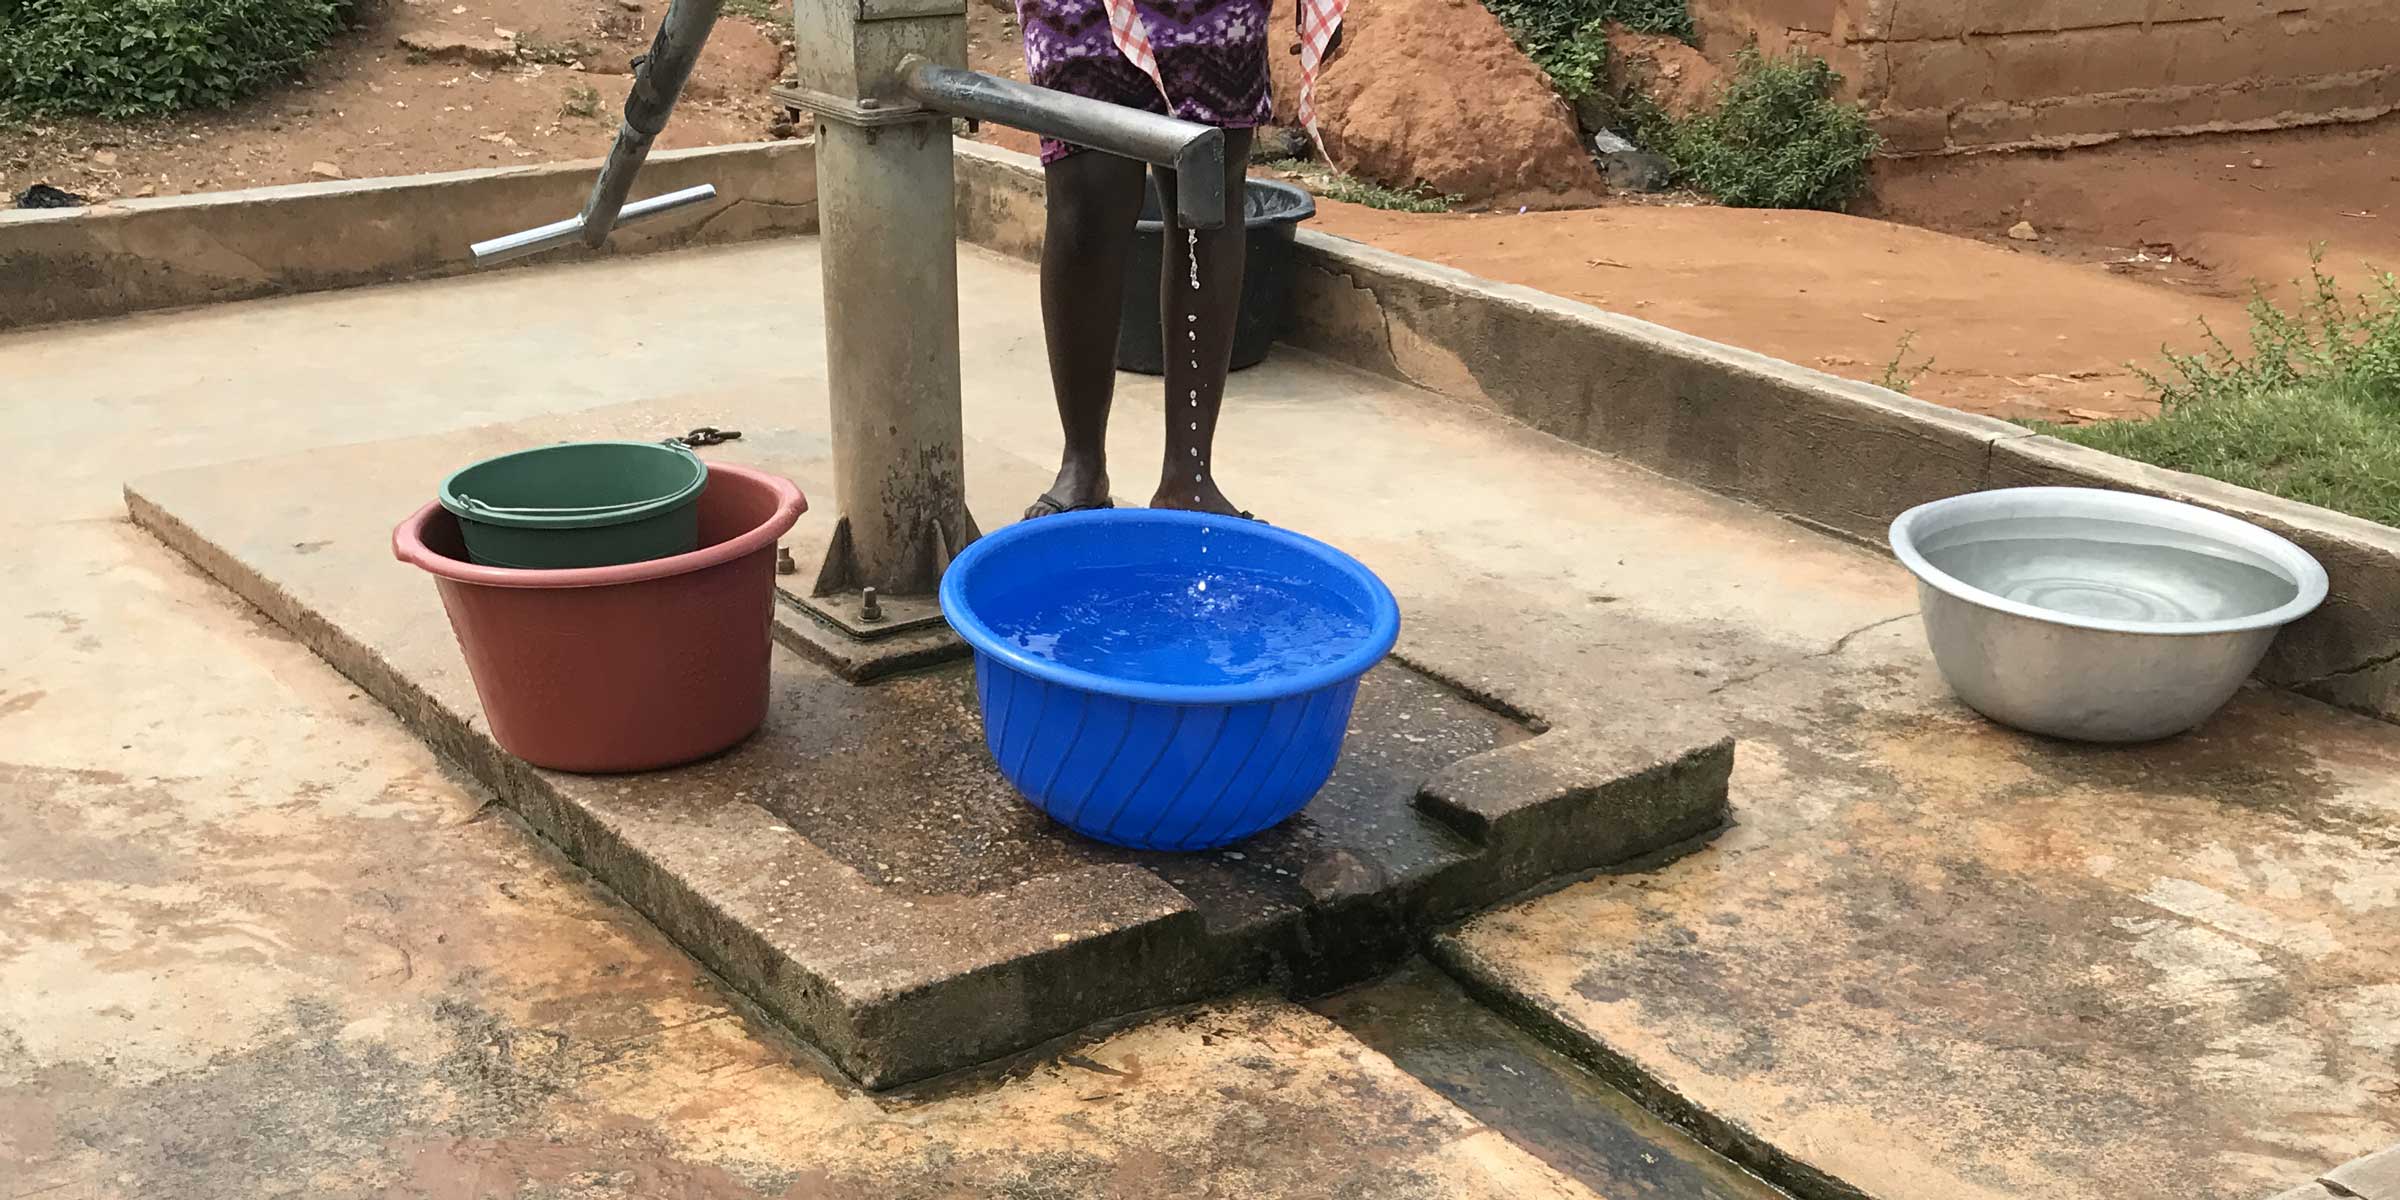 A community water point.